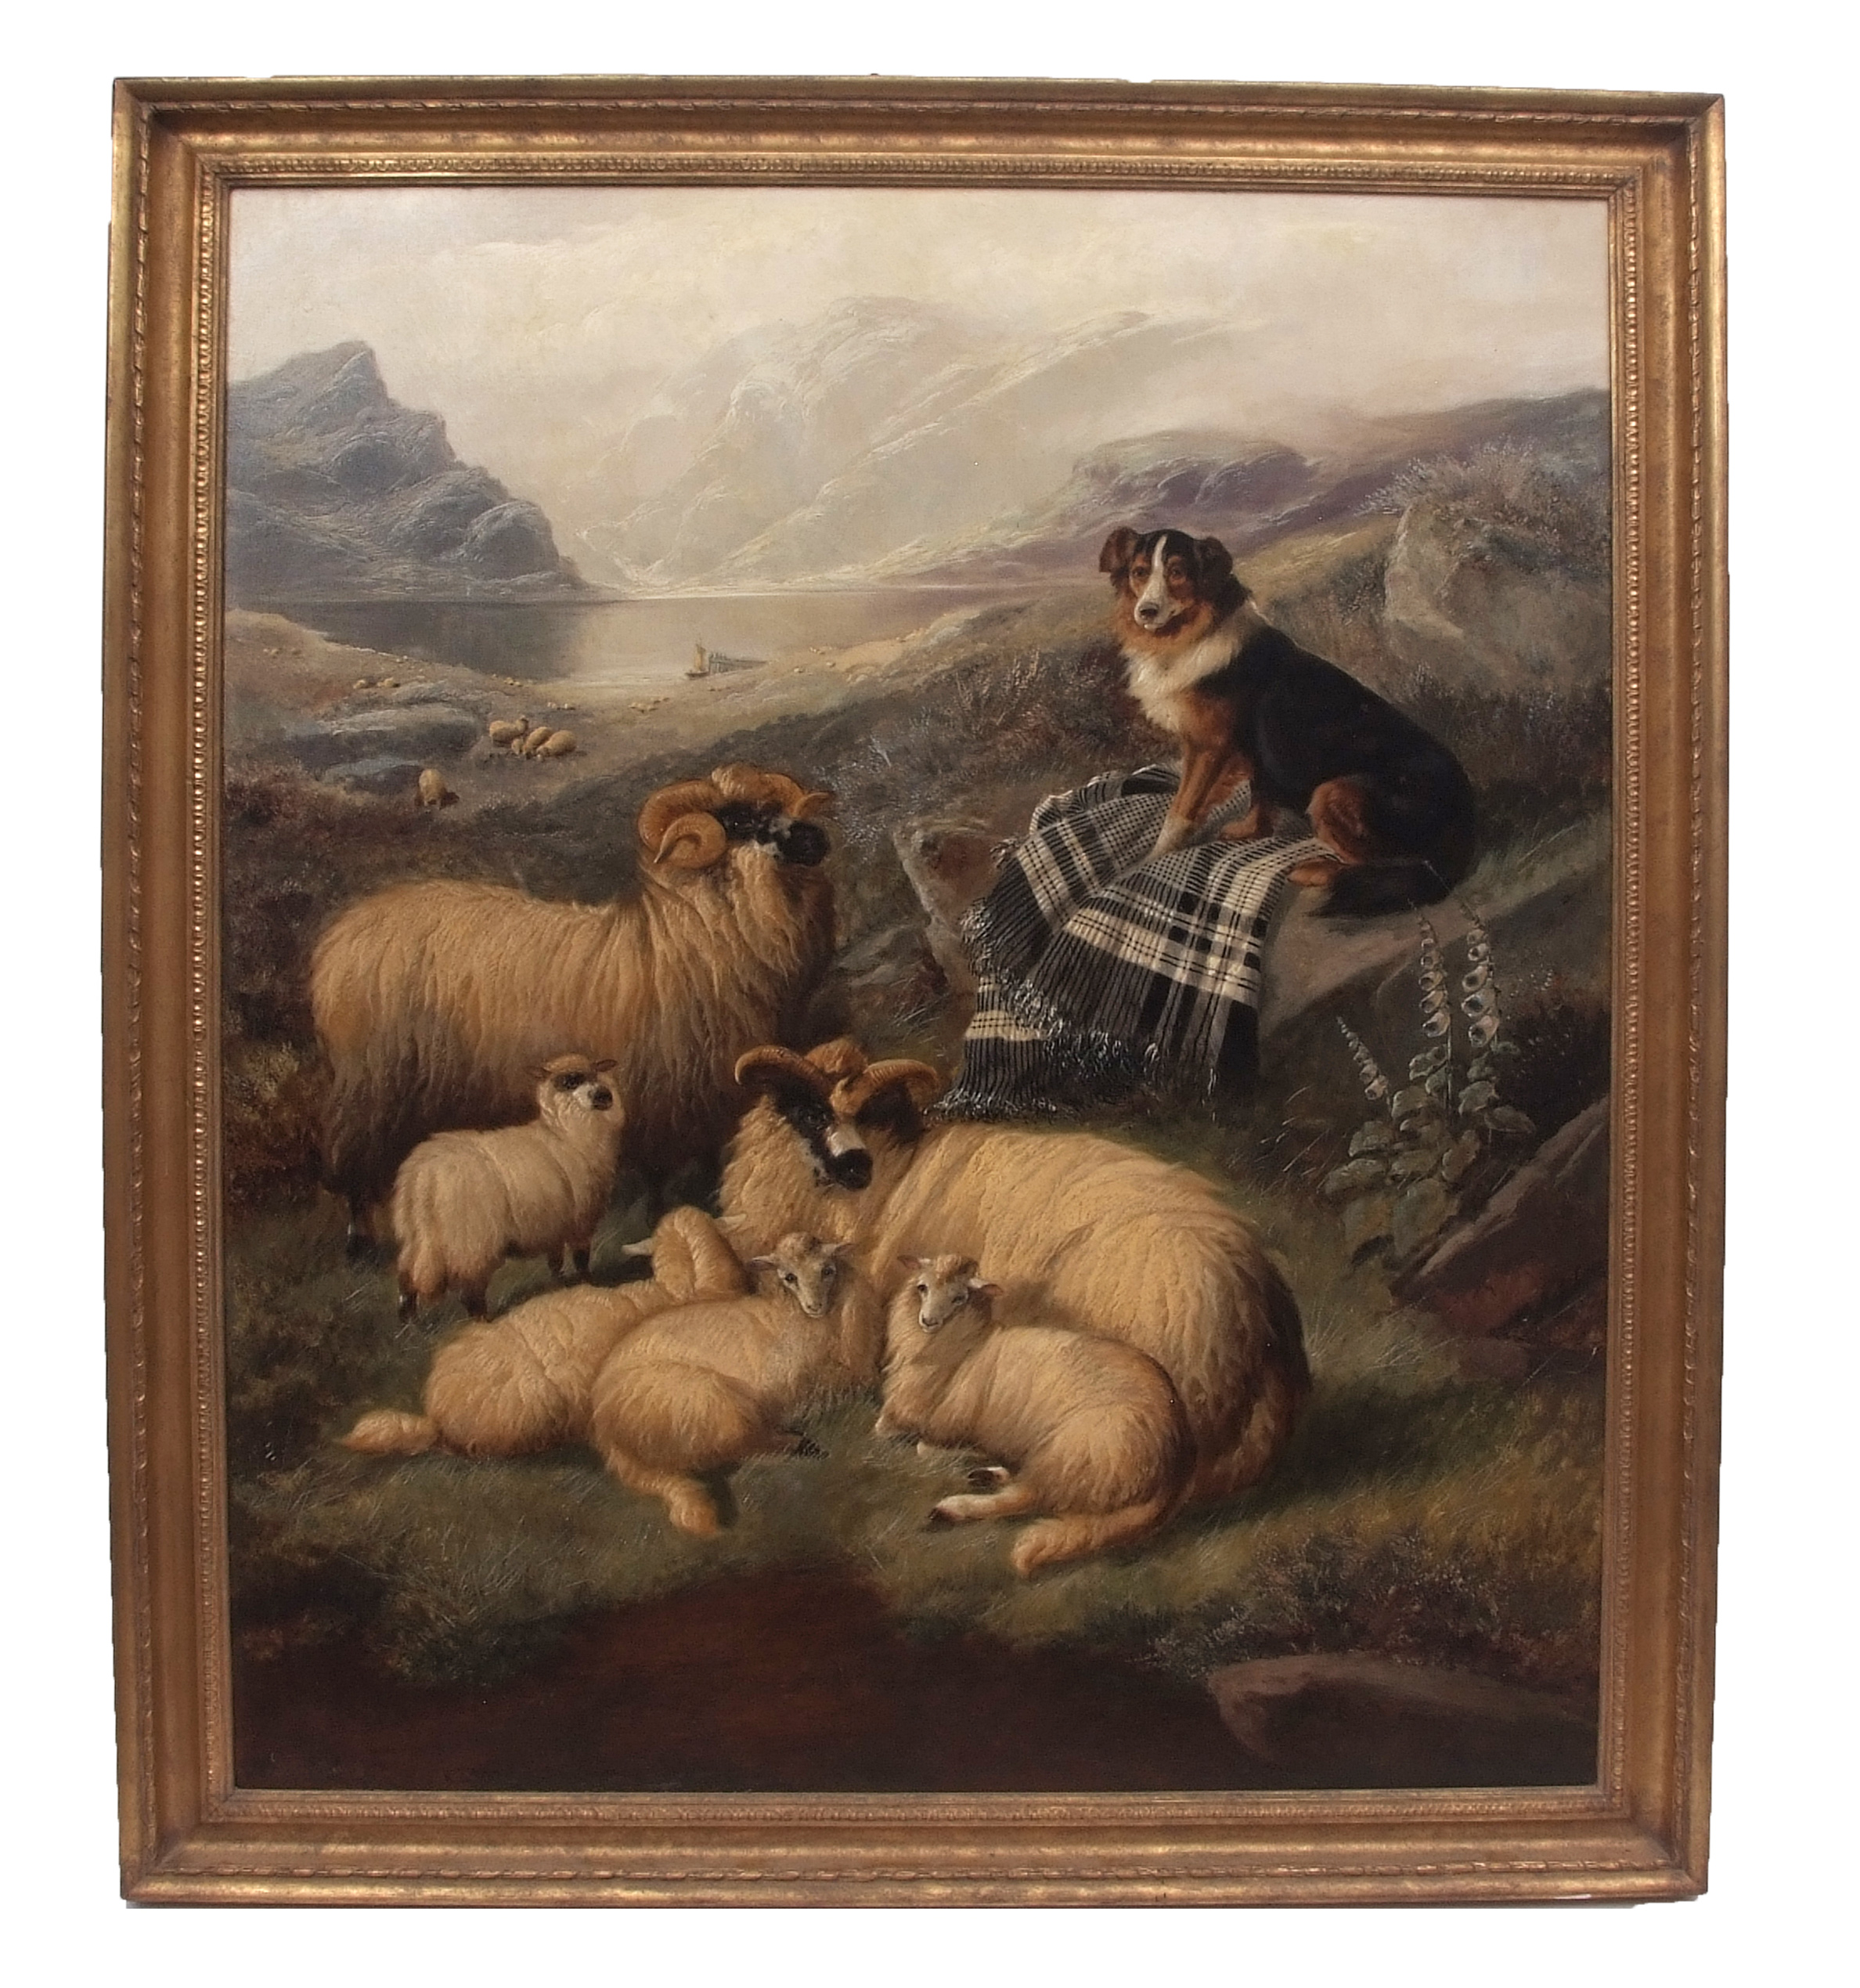 JOHN CHARLES MORRIS (act 1851-1889) Extensive Scottish landscape with sheep and collie dog oil on - Image 2 of 2